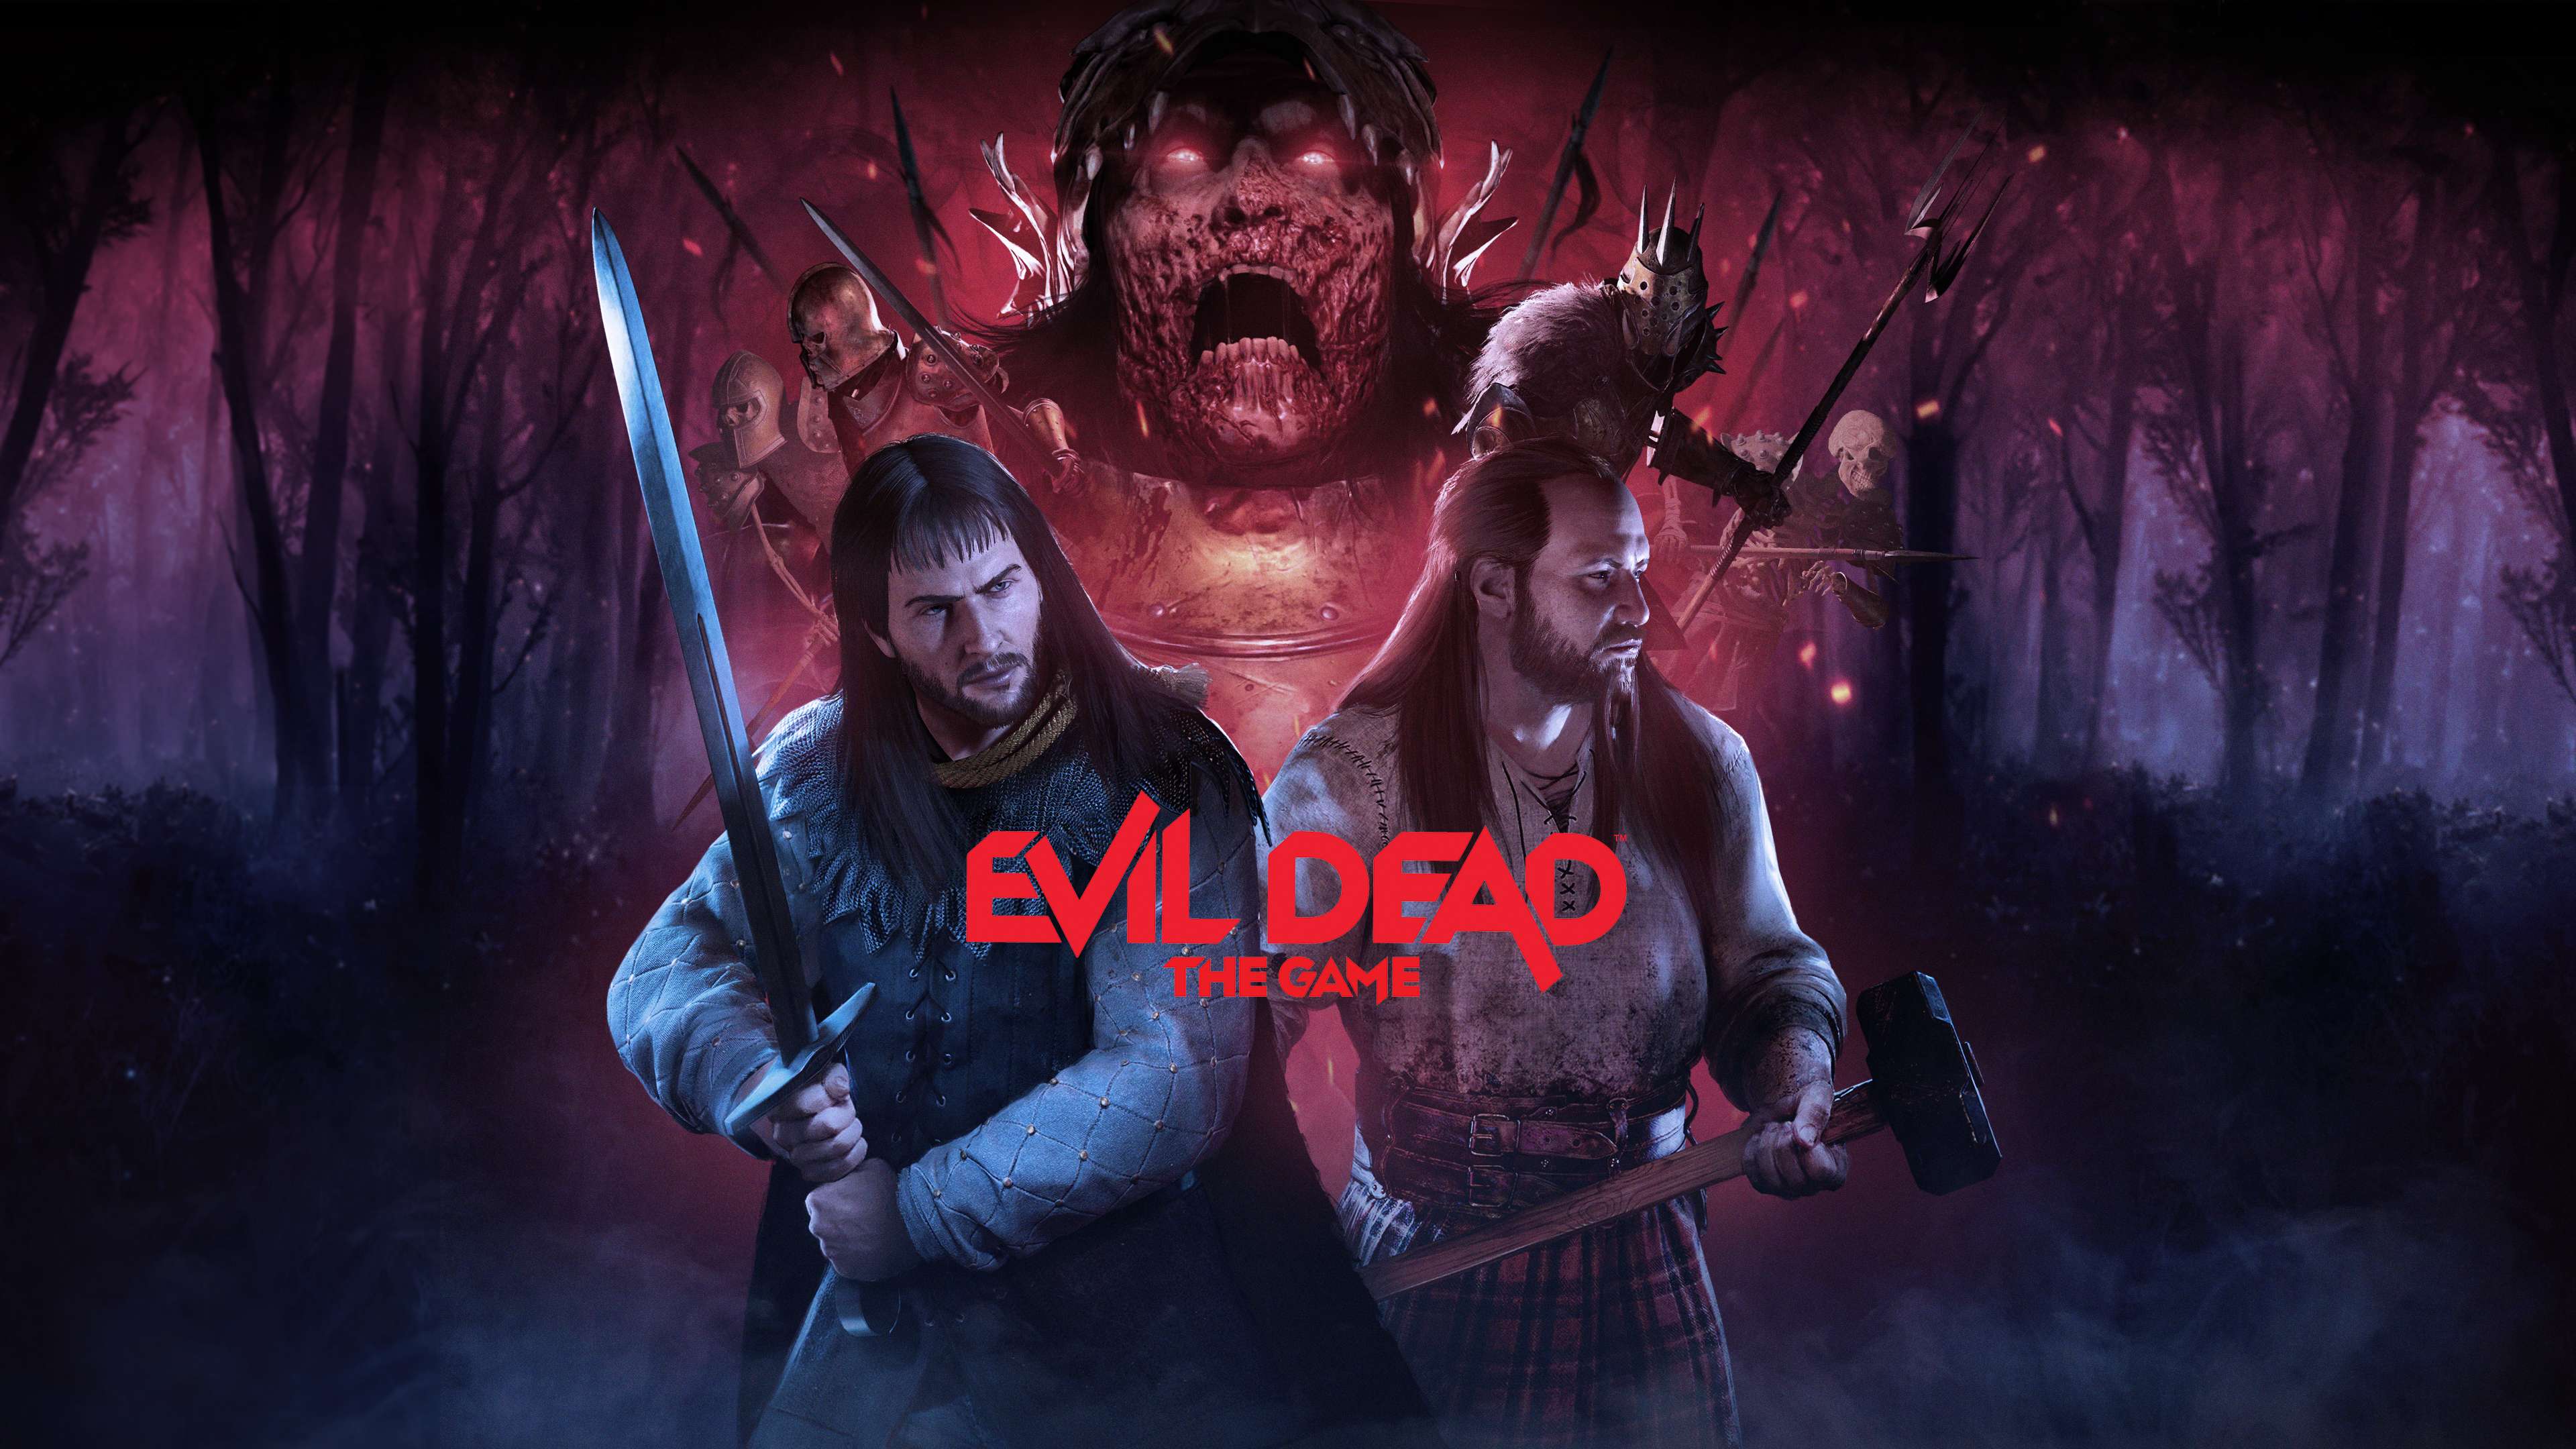 Army of Darkness” update launches today for Evil Dead: The Game